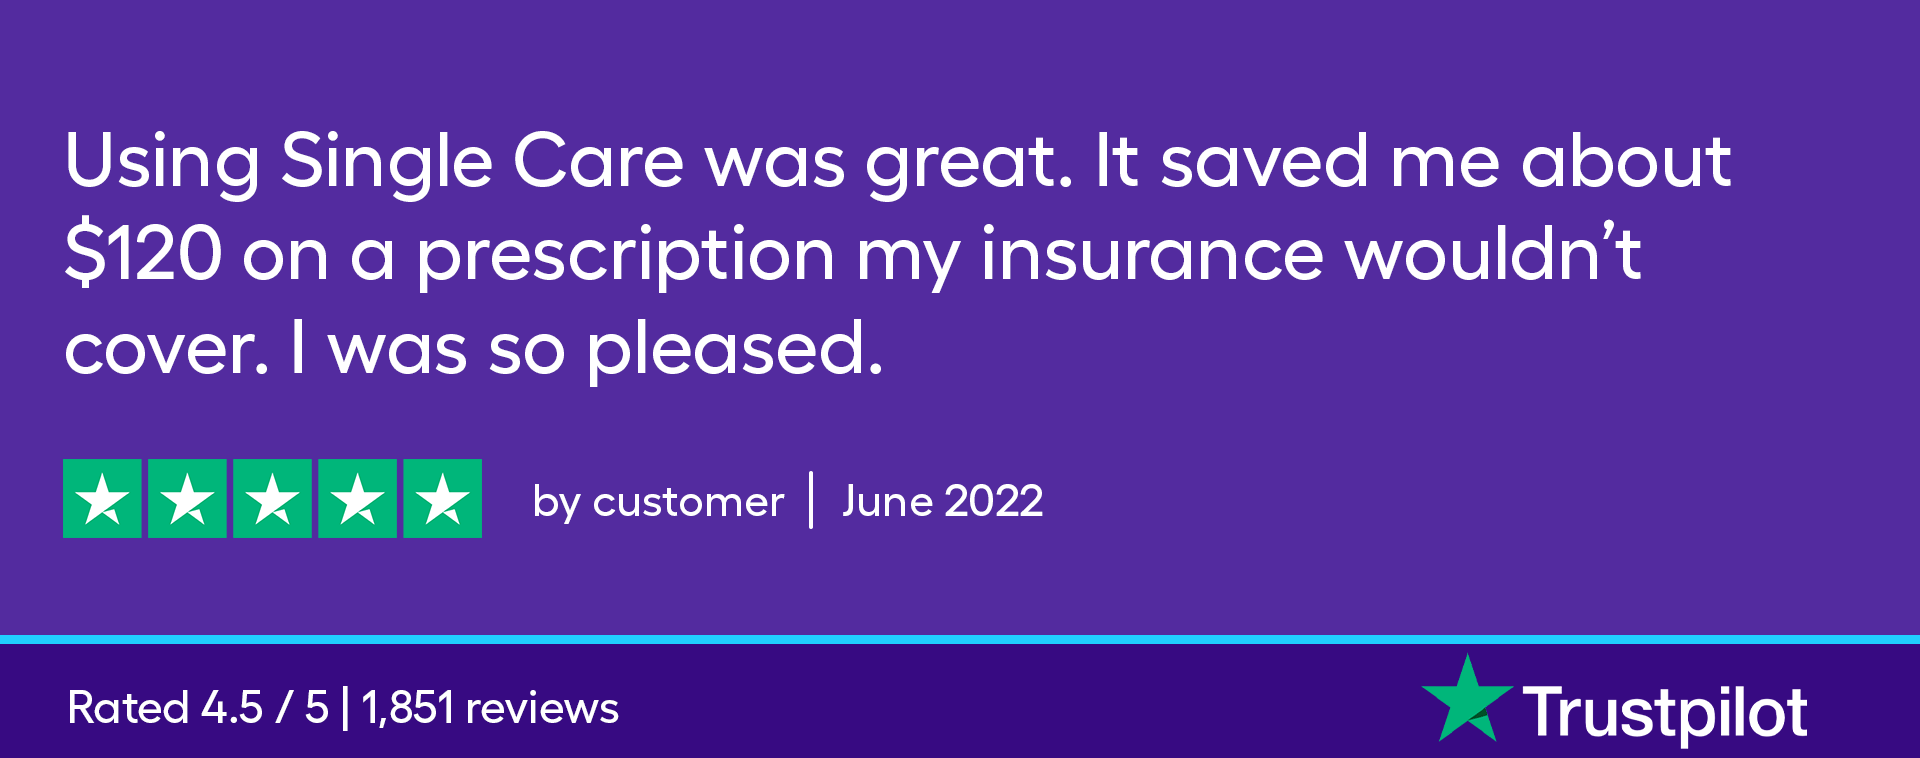 Using SingleCare was great. It saved me about $120 on a prescription my insurance wouldn’t cover. I was so pleased. 